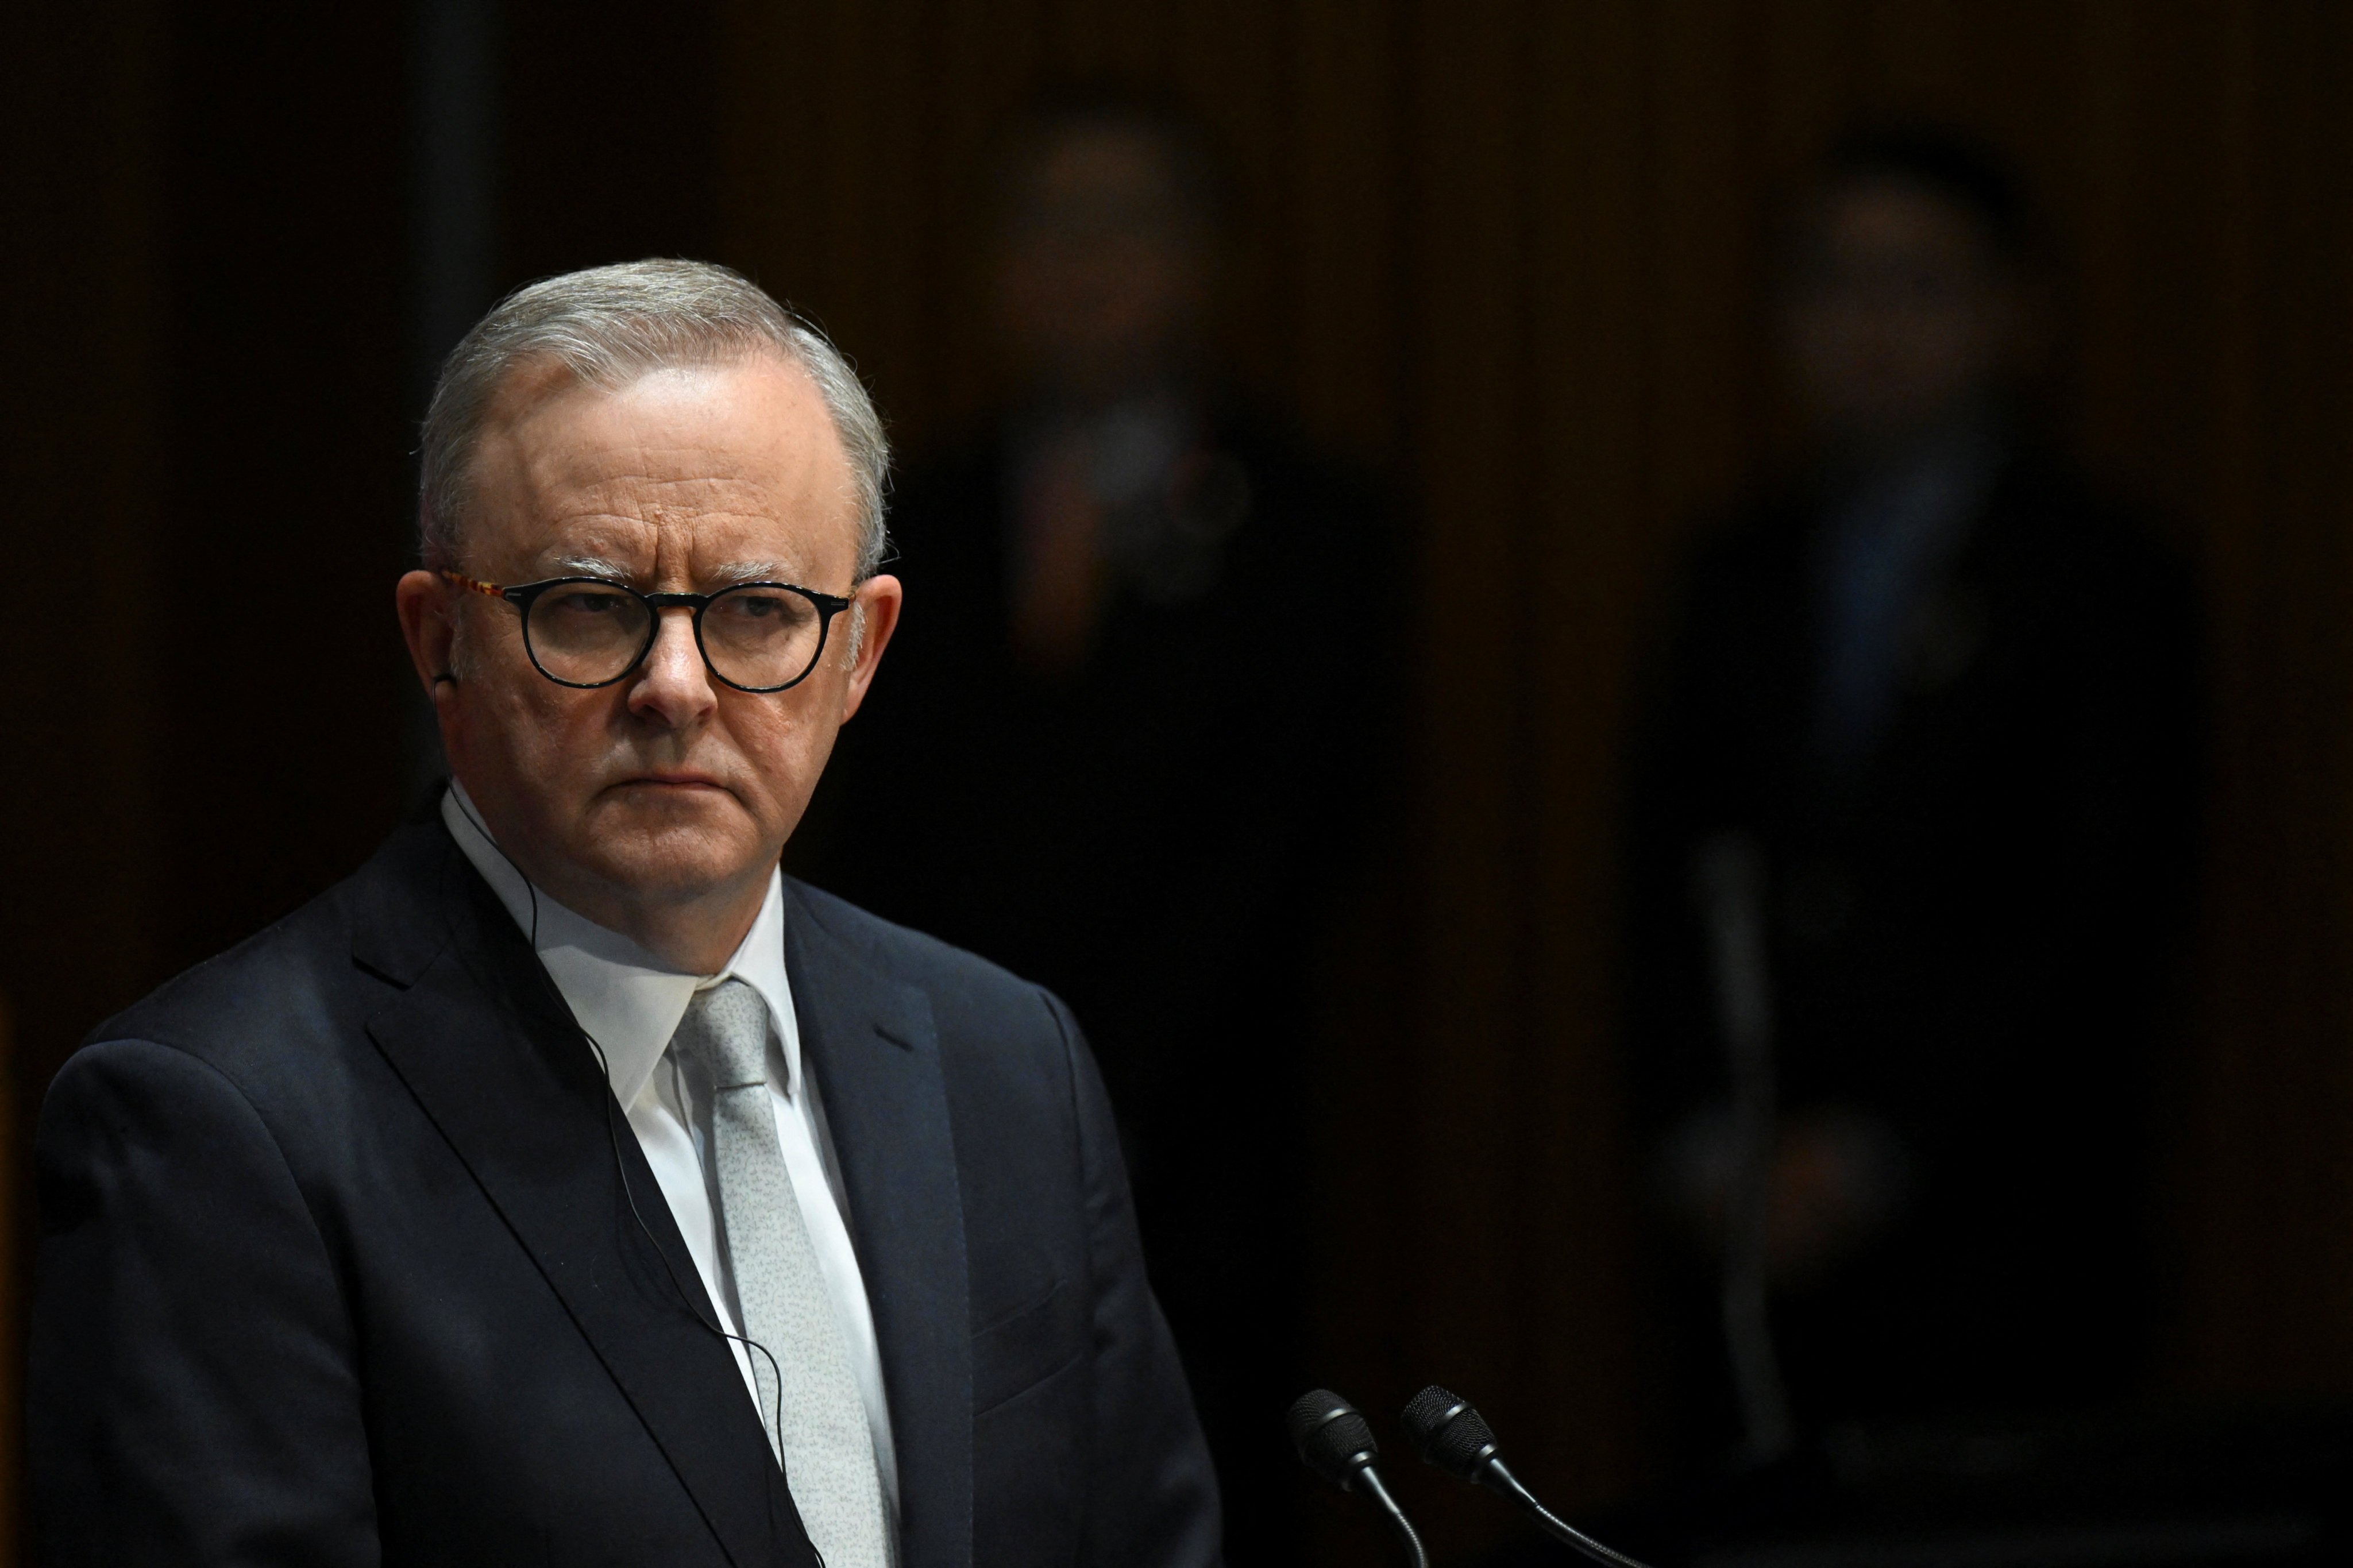 Australian Prime Minister Anthony Albanese speaks to the media during a signing ceremony at the Australian Parliament House in Canberra on Monday. Photo: Pool via Reuters